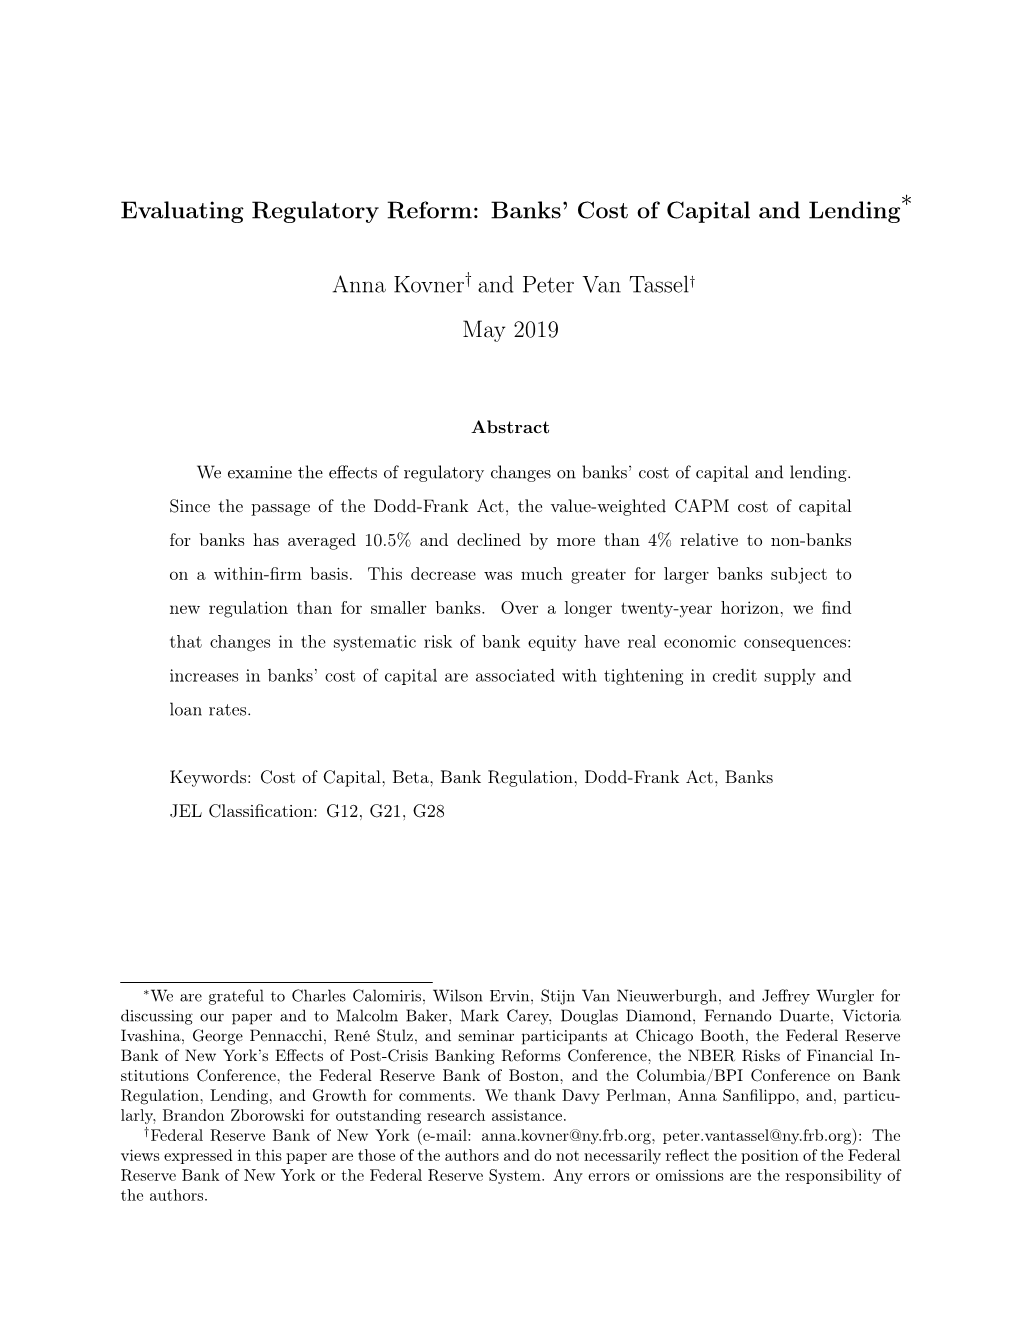 Evaluating Regulatory Reform: Banks' Cost of Capital and Lending